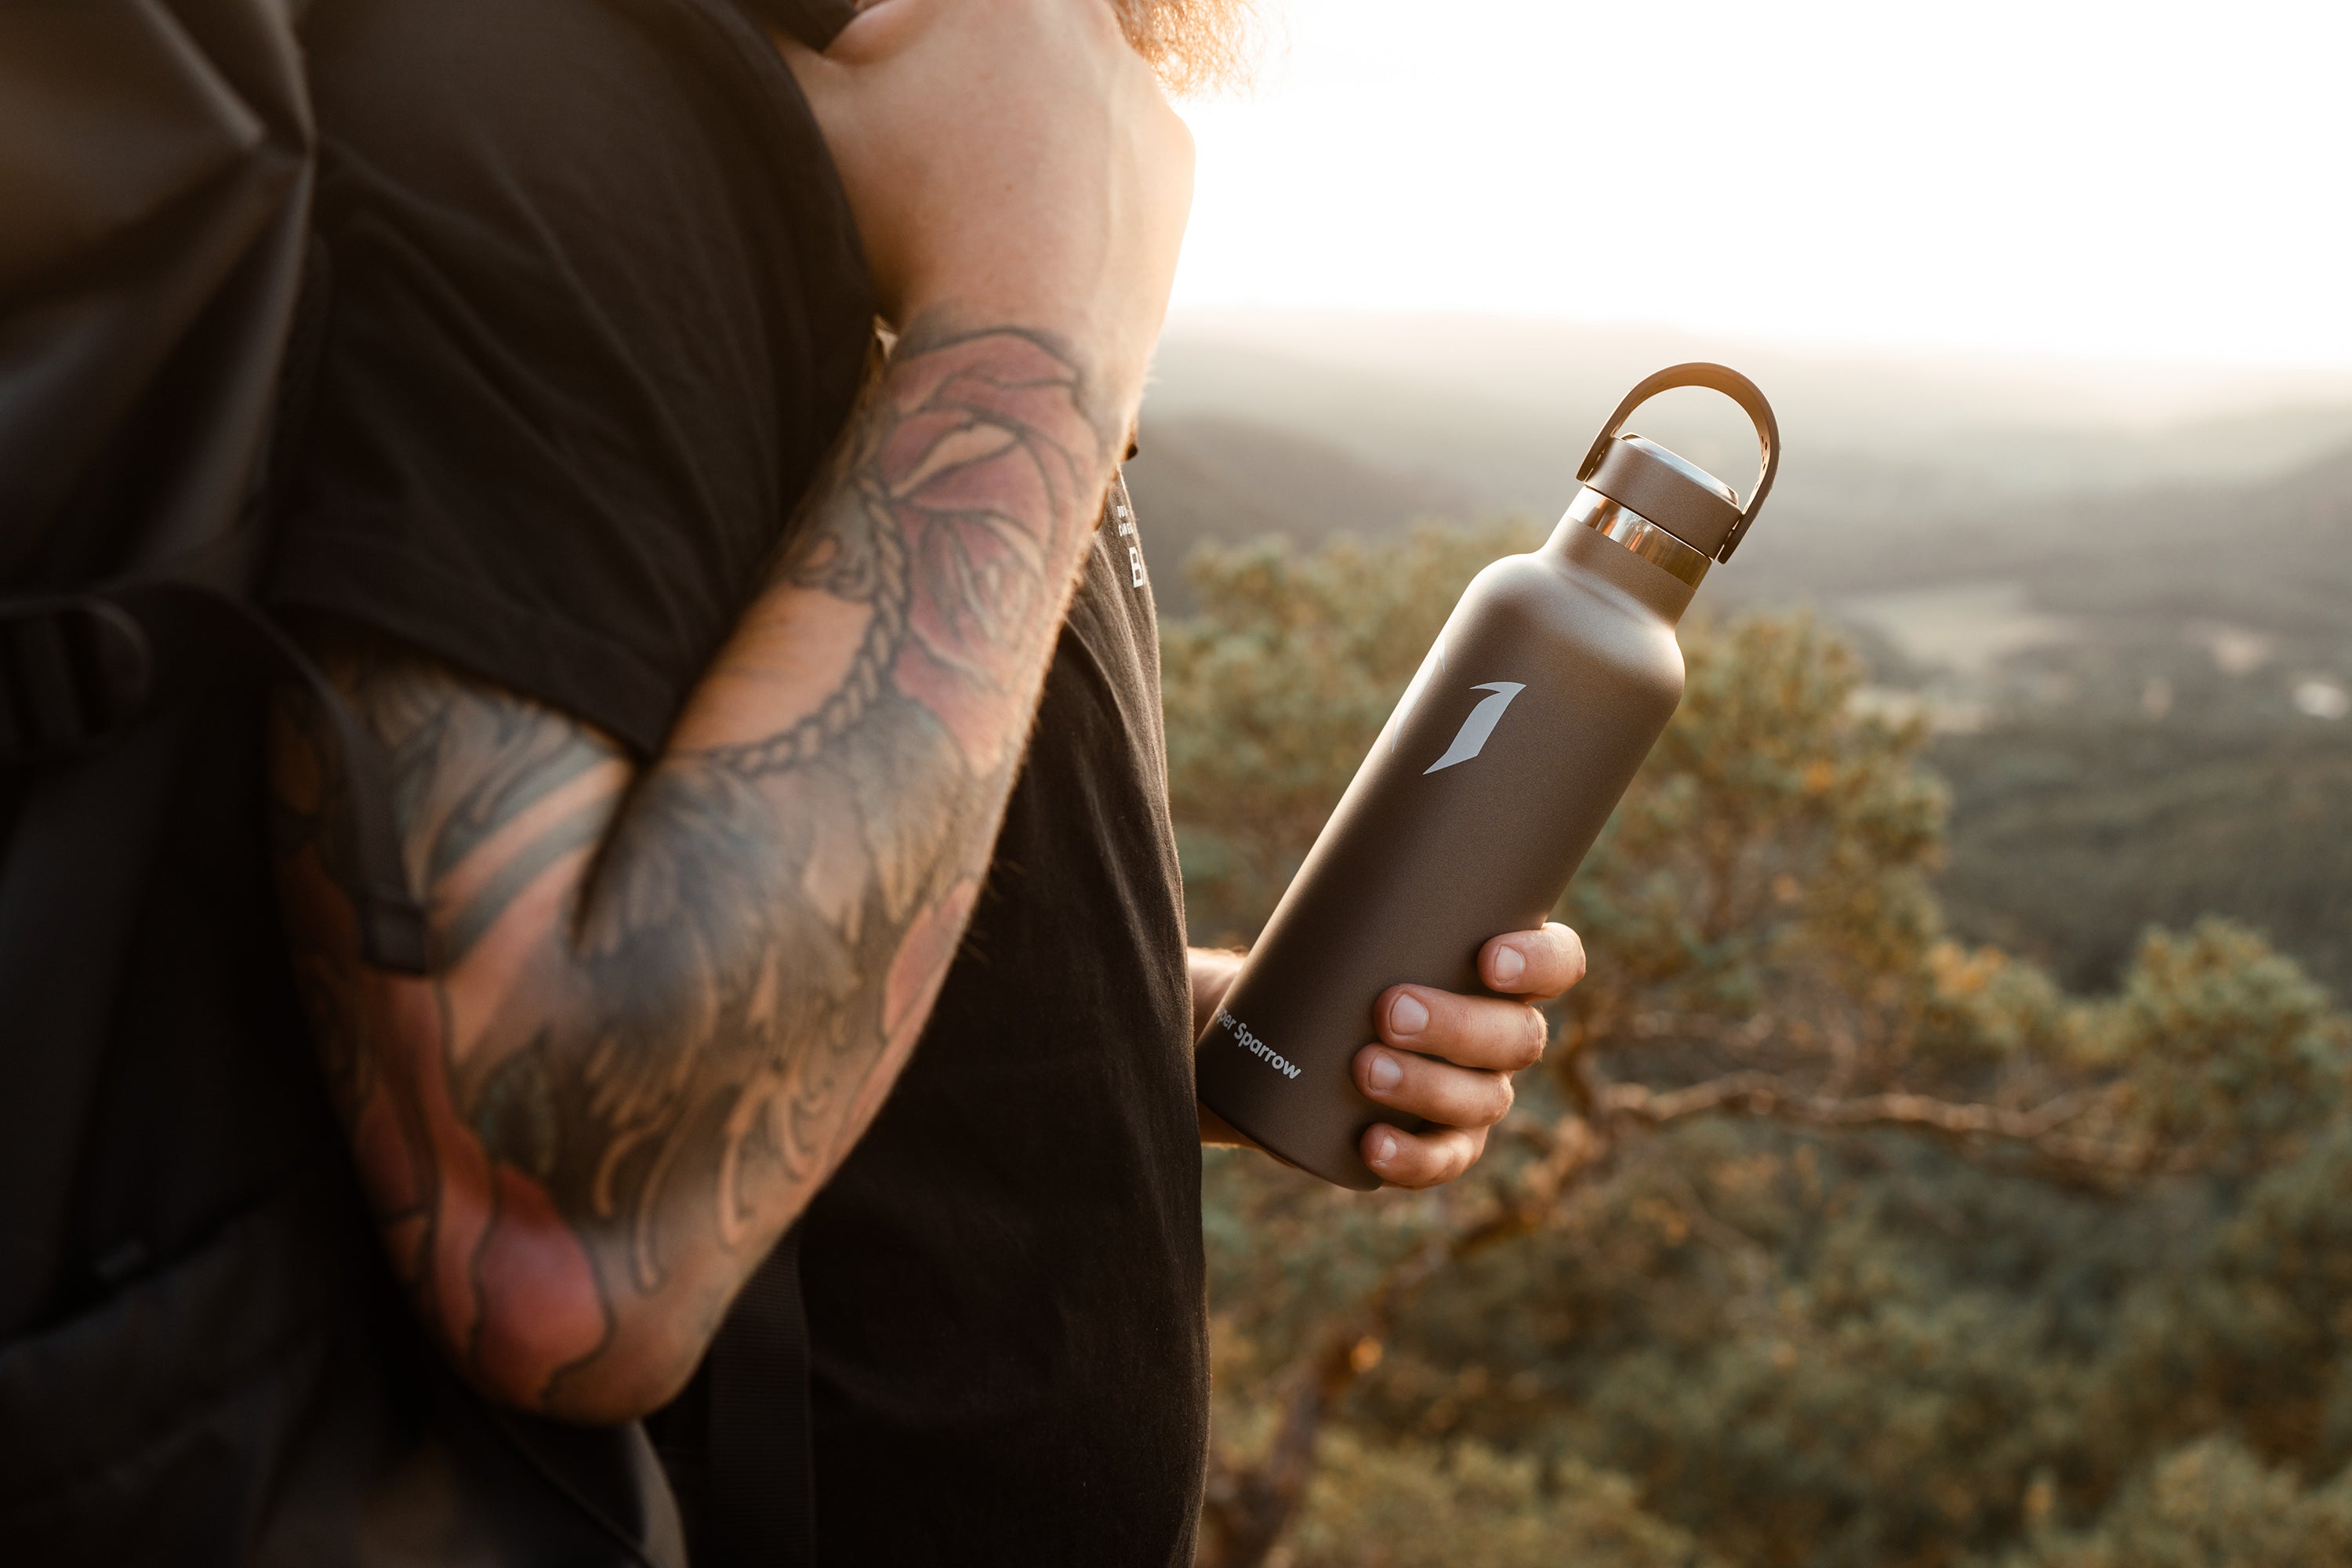  Super Sparrow Water Bottle - 500ml & 750ml - Double Wall Vacuum  Insulated Stainless Steel Leak Proof Sports Bottle, BPA Free Cap  (750ml-25oz, Grey) : Home & Kitchen